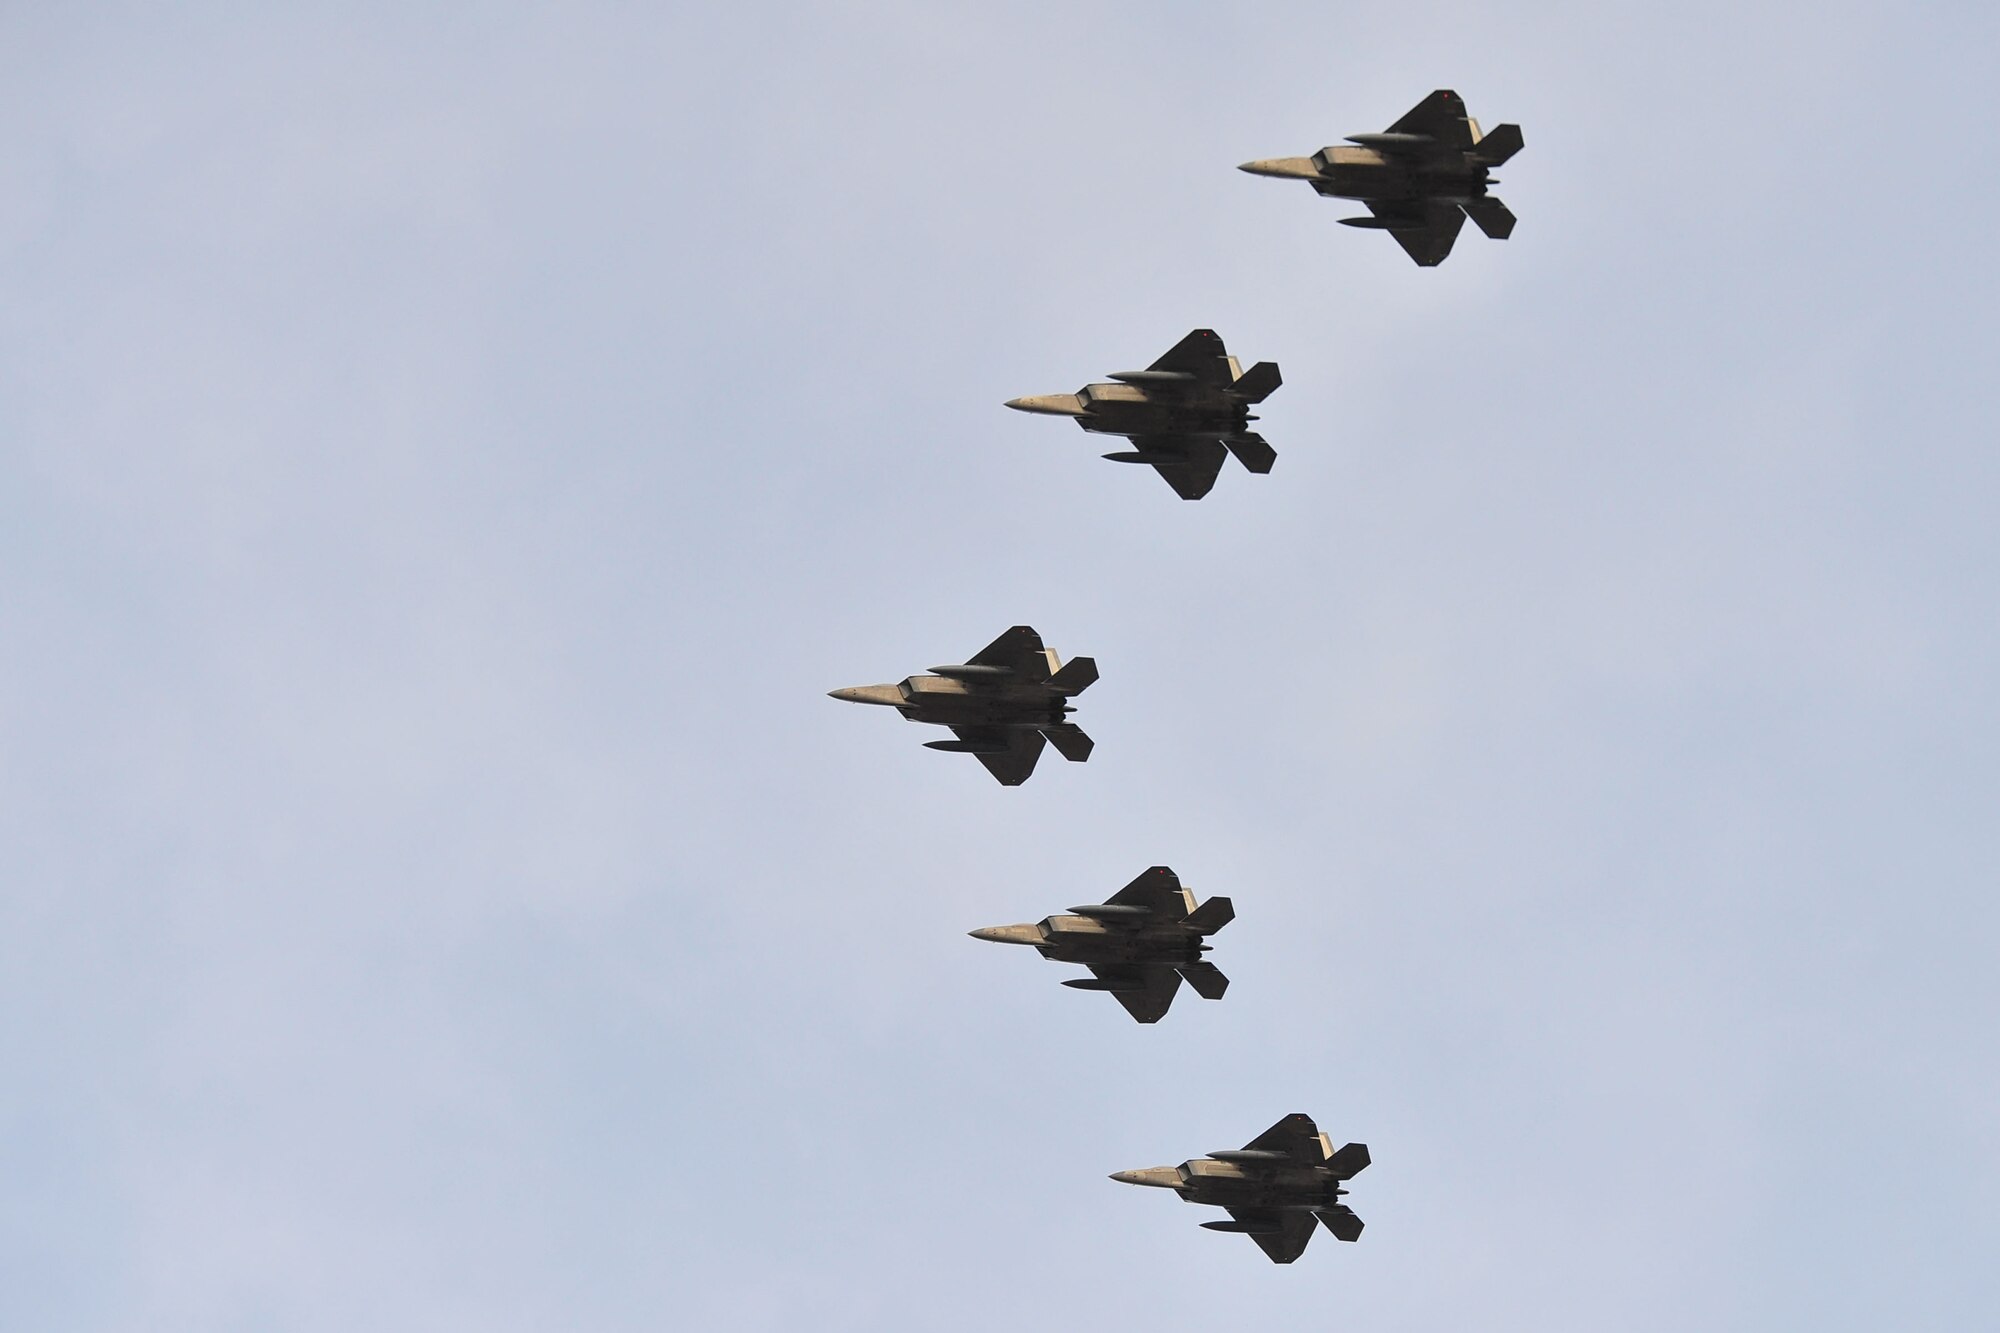 The first five F-22 Raptors for the 95th Fighter Squadron perform a flyover Jan. 6, 2014, at Tyndall Air Force Base, Fla. With all 24 F-22s transferred from Holloman Air Force Base, N.M., Tyndall AFB leaders declared the 95th FS at Initial Operational Capability April 8. (U.S. Air Force photo/Airman 1st Class Dustin Mullen)